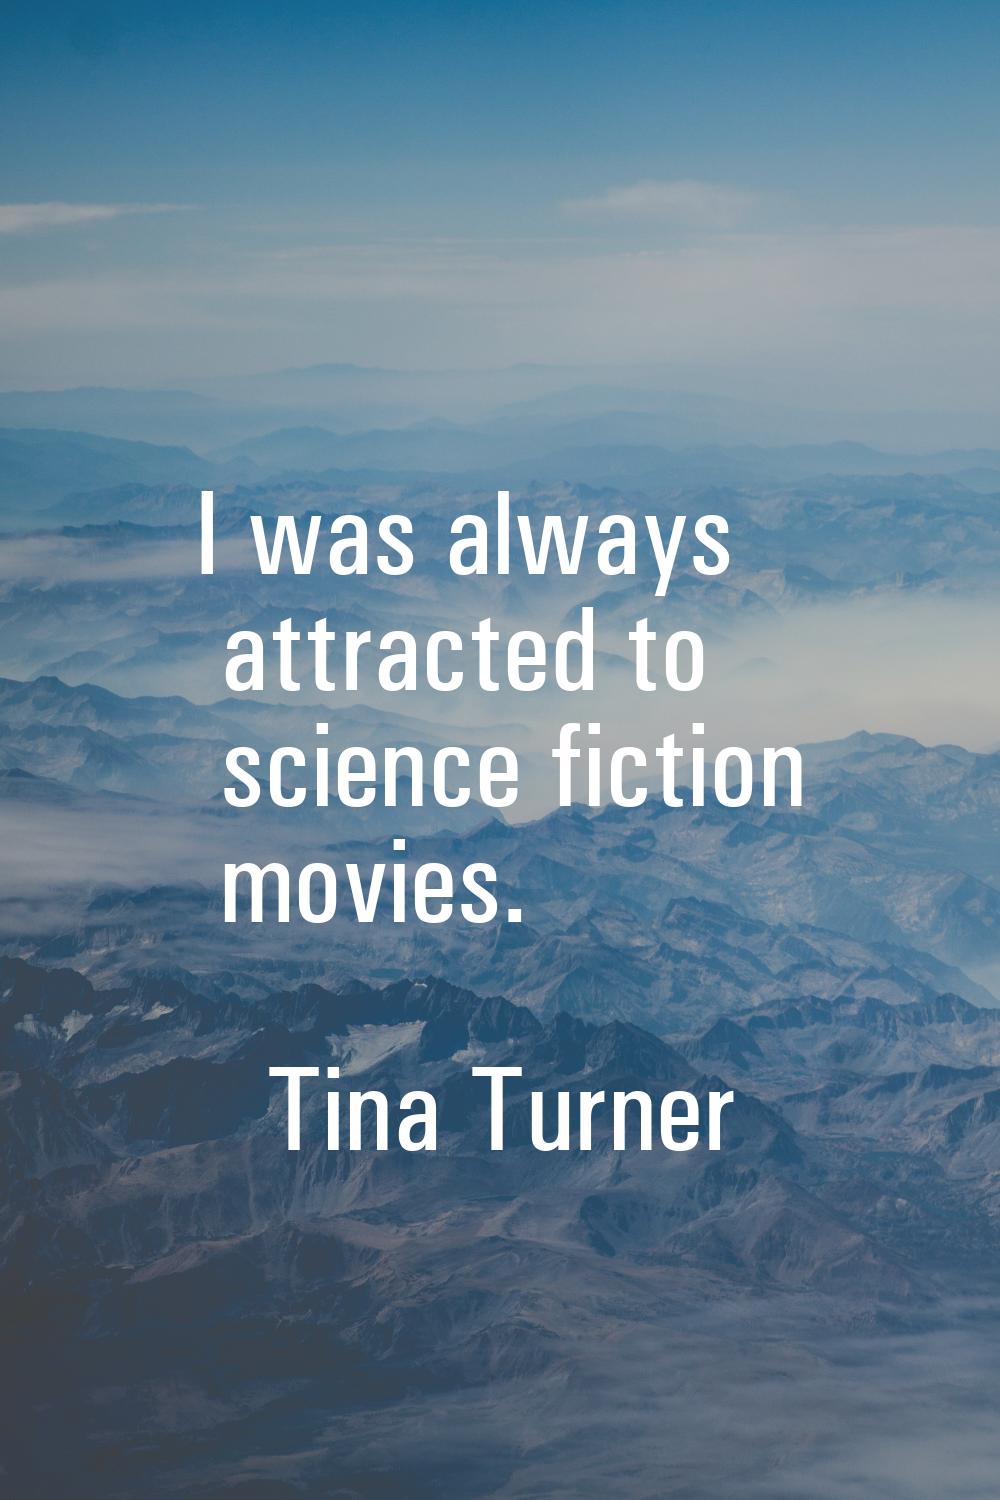 I was always attracted to science fiction movies.